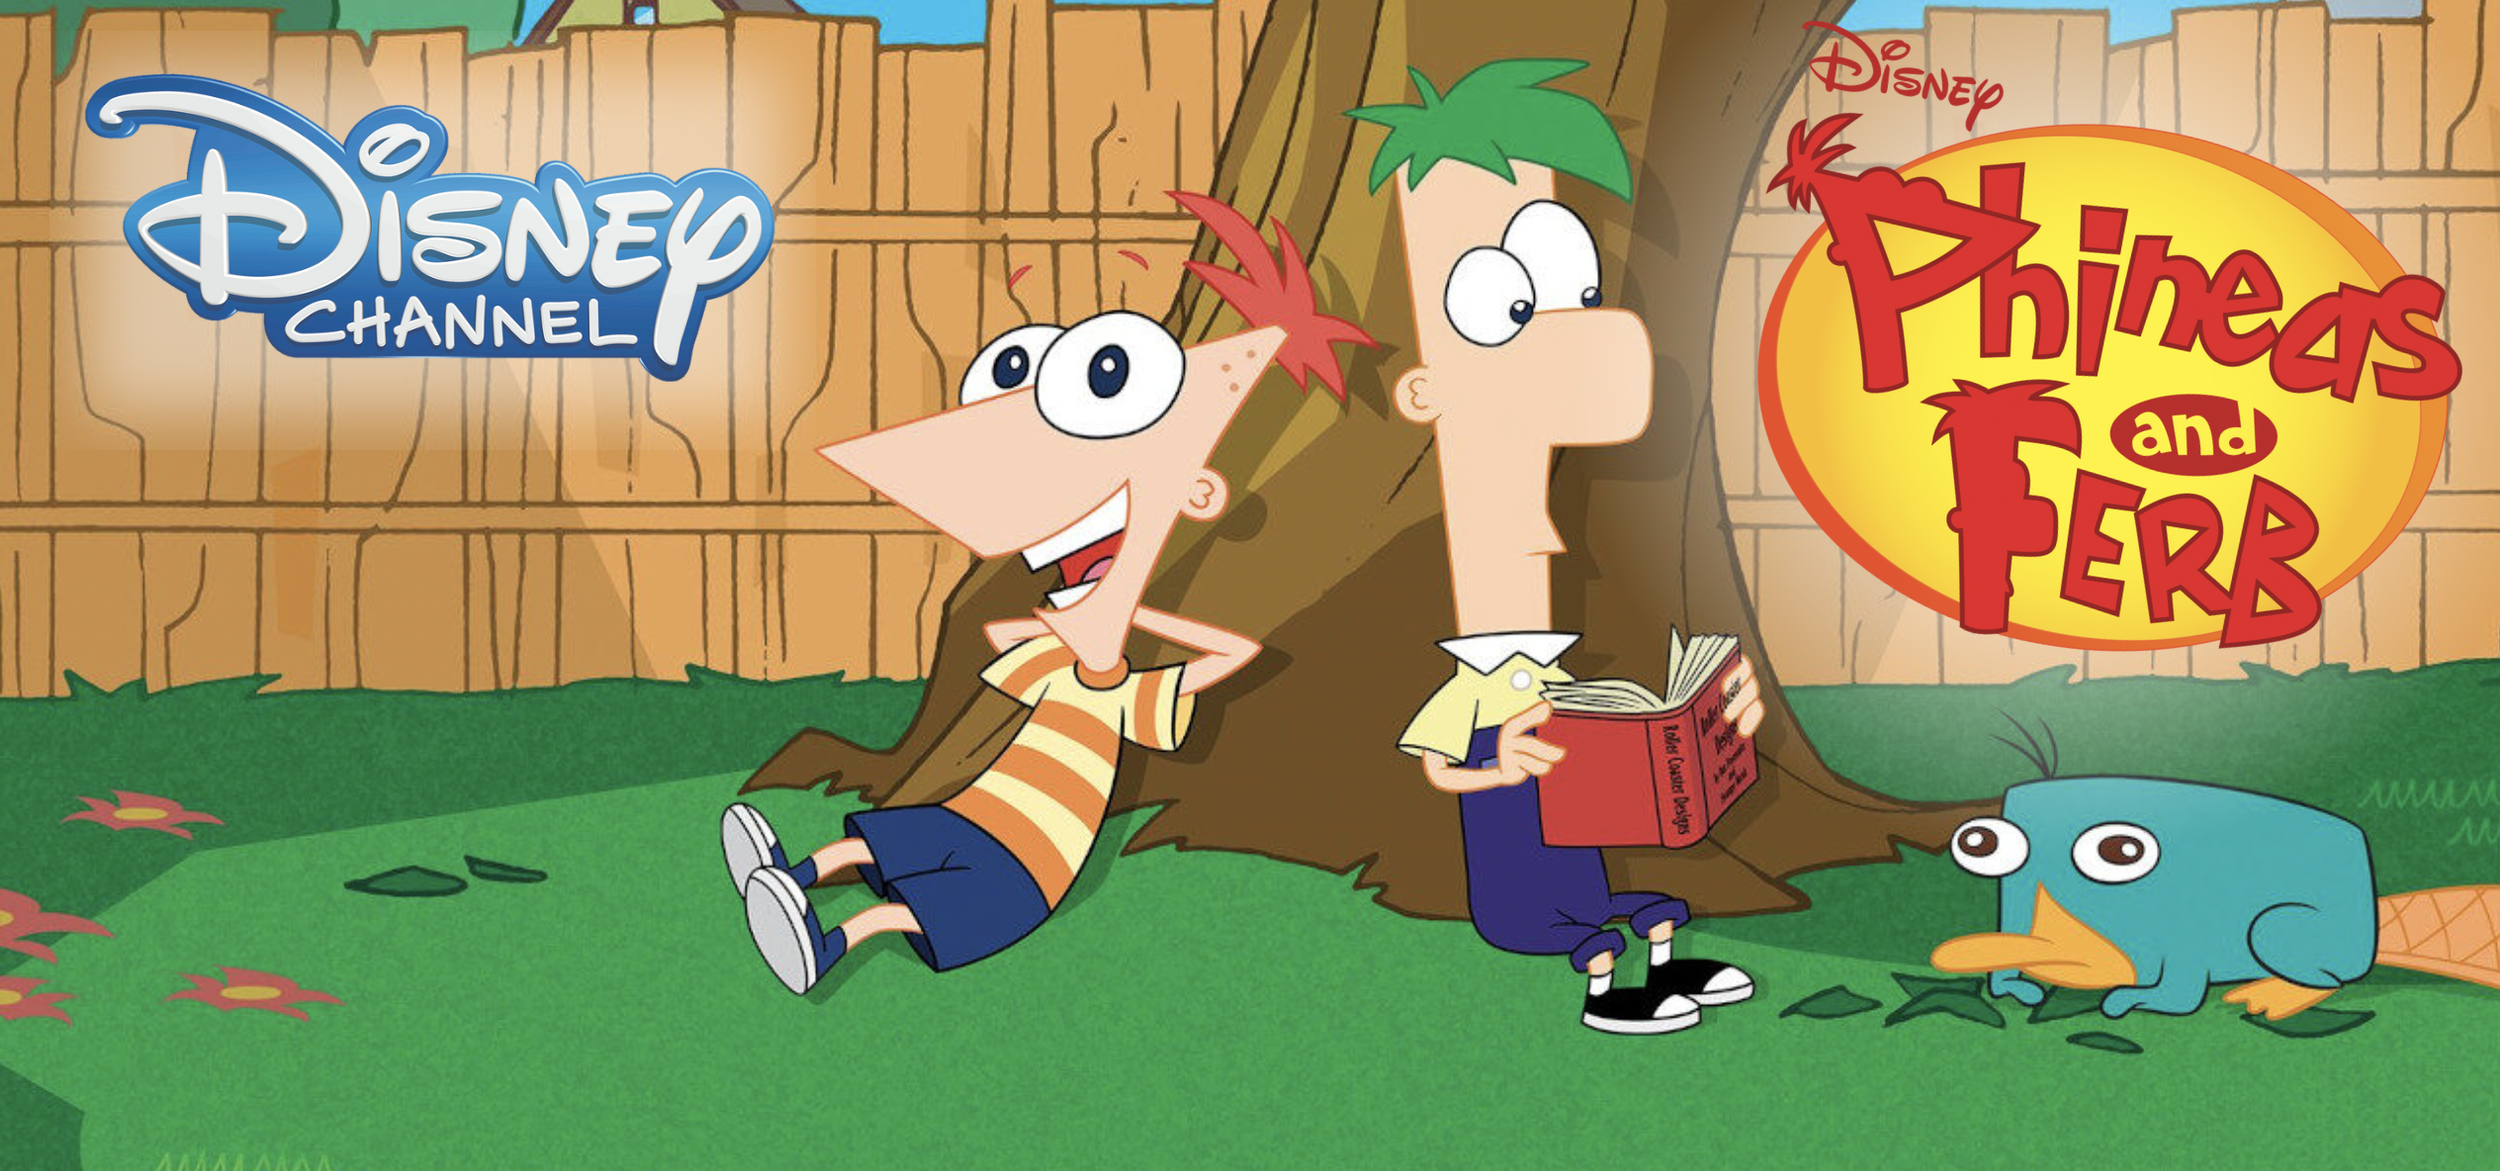 Phineas ferb